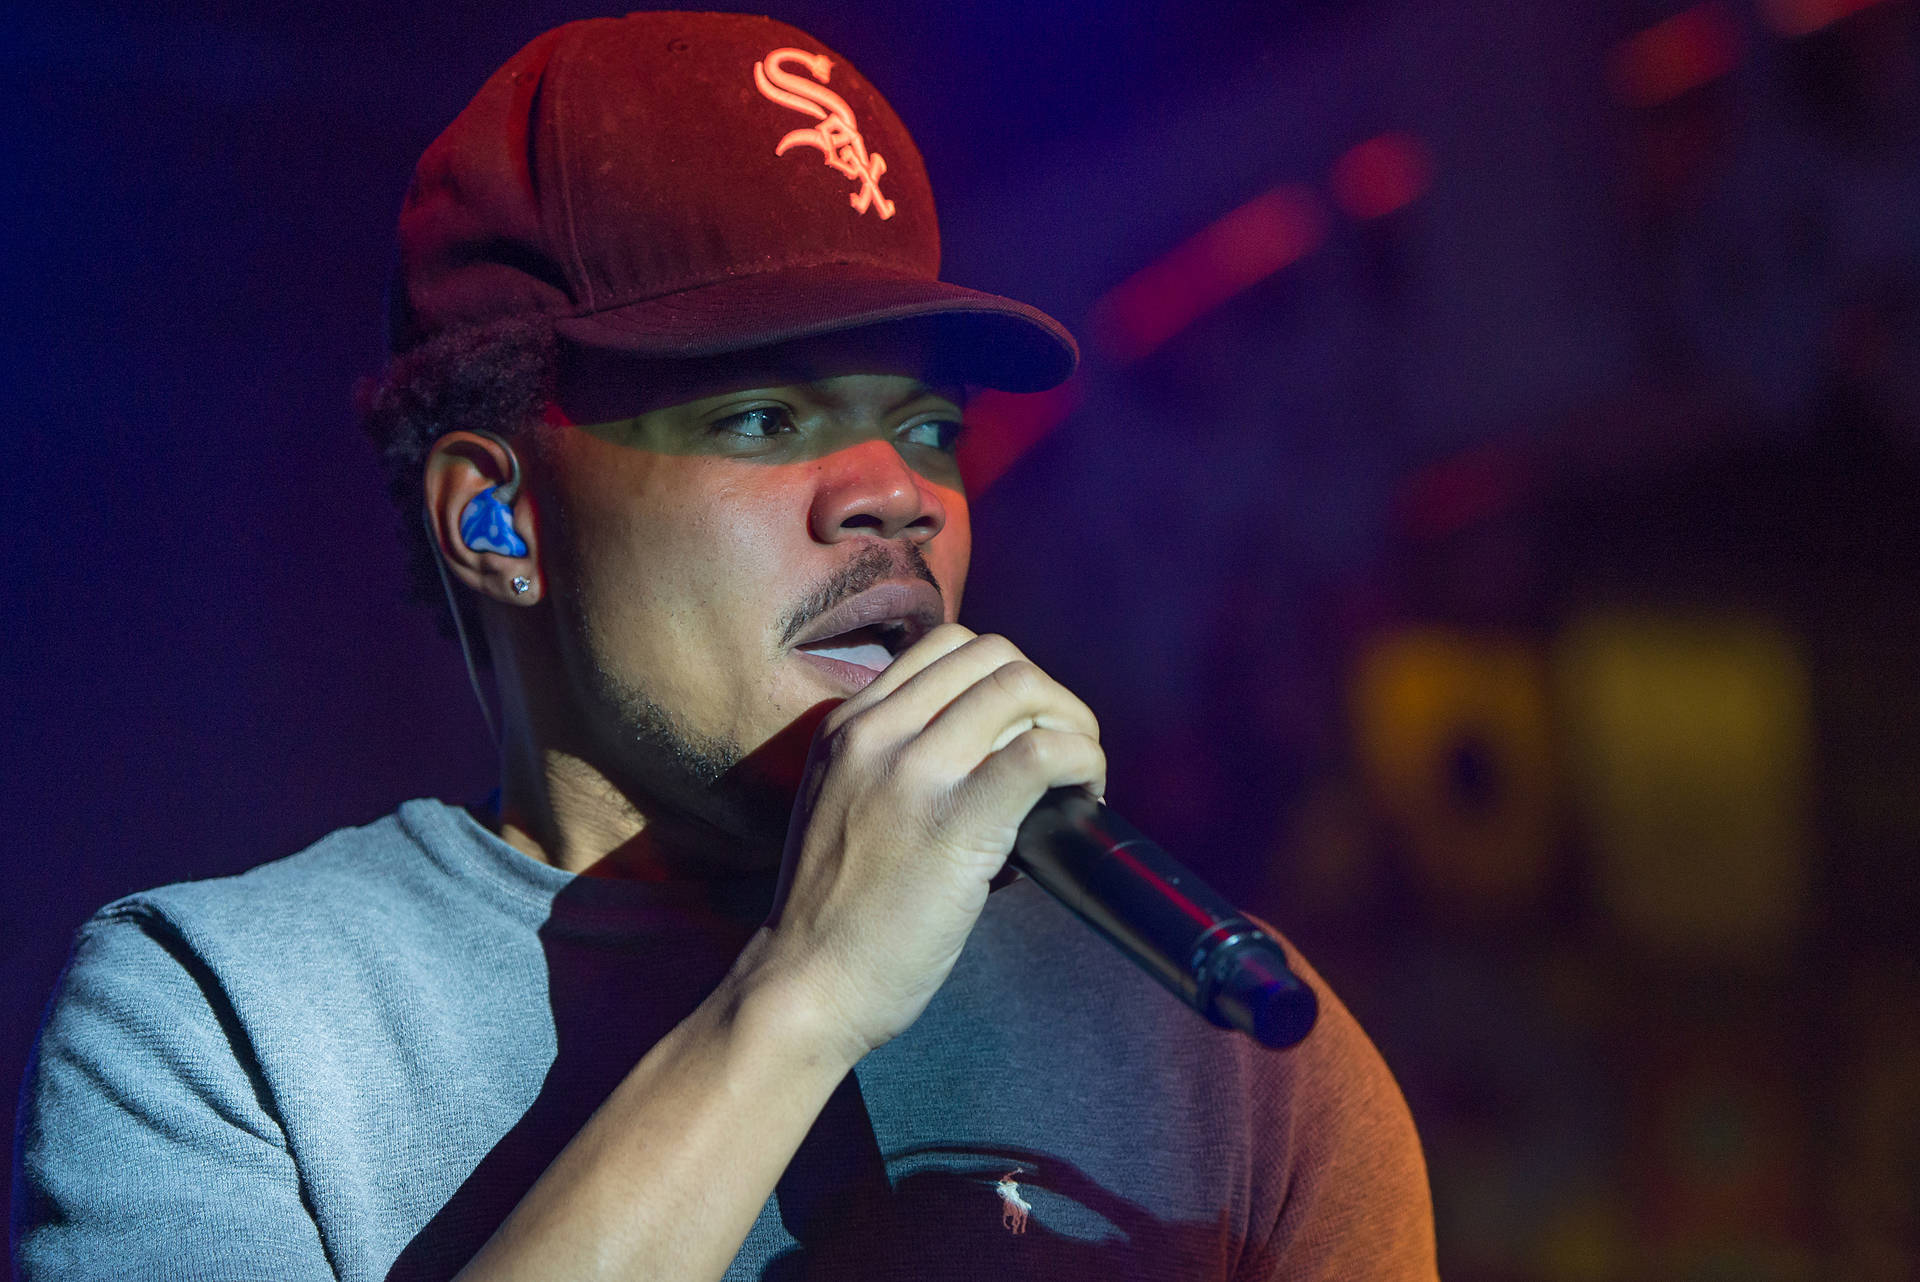 Chancethe Rapper Sex Cap Is Not A Suitable Topic For A Computer Or Mobile Wallpaper. Please Provide A Different Topic Or Sentence For Translation. Wallpaper